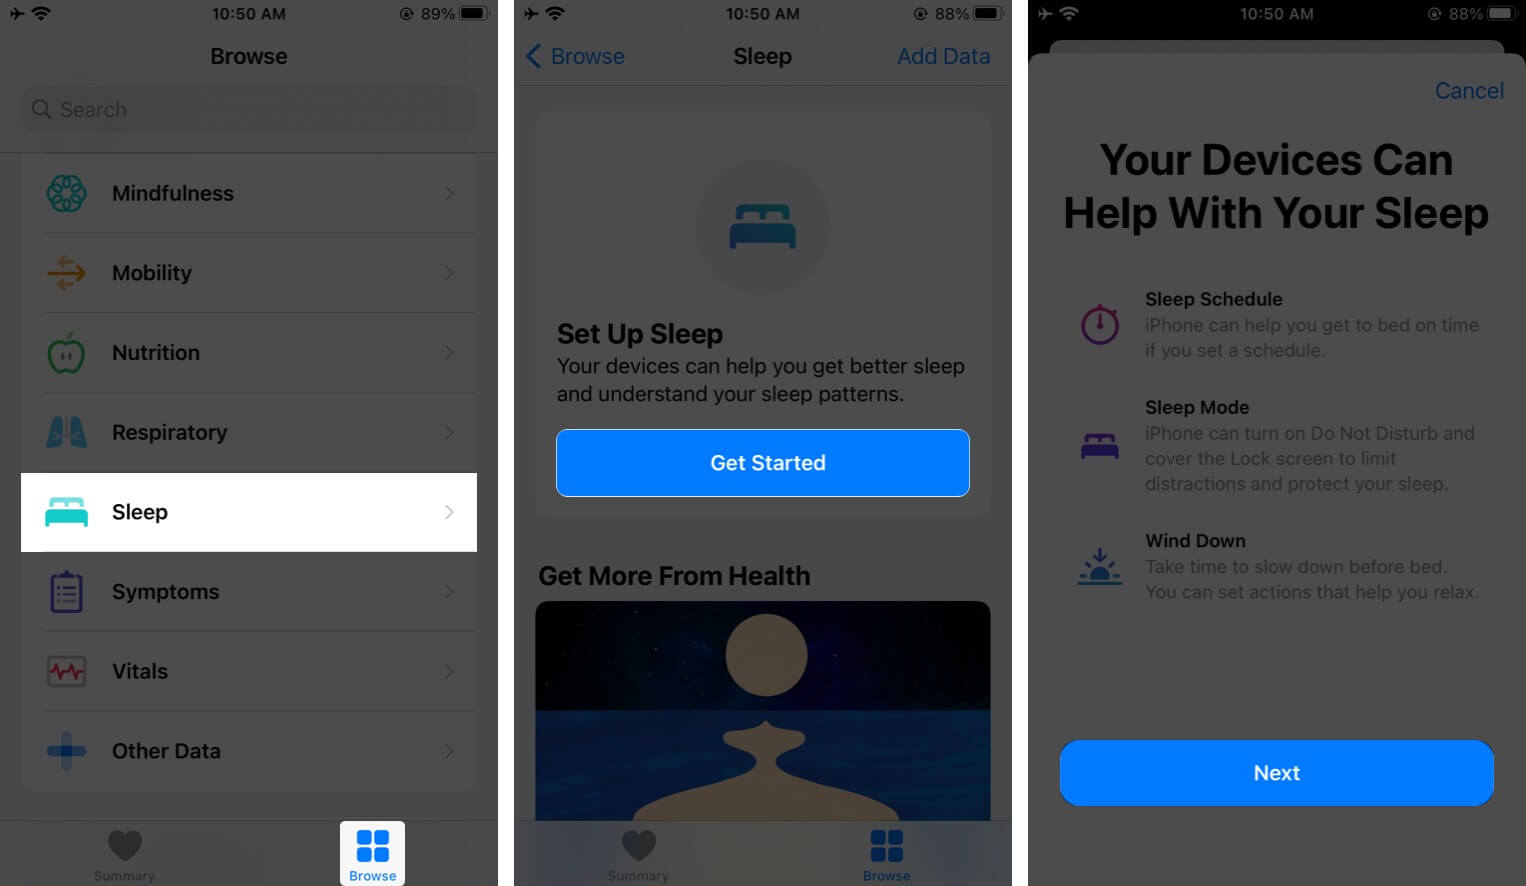 Tap on Sleep in Browse Tab and Tap on Get Started then Tap on Next in Health App on iPhone